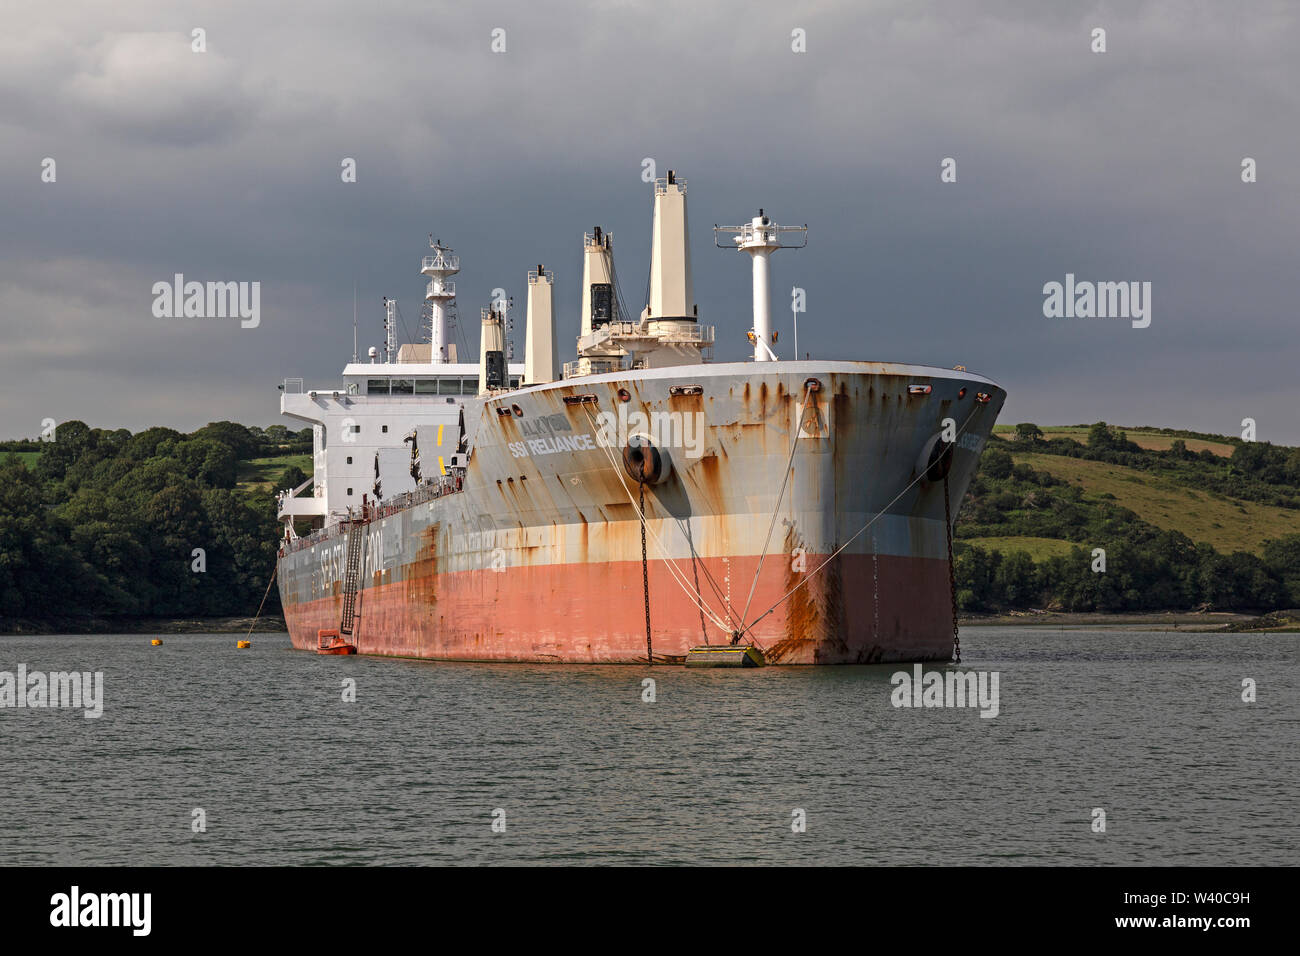 The SSI Reliance, a bulk cargo carrier registered in the Marshall Islands, anchored in the mouth of the Fall River in Cornwall, England. Stock Photo